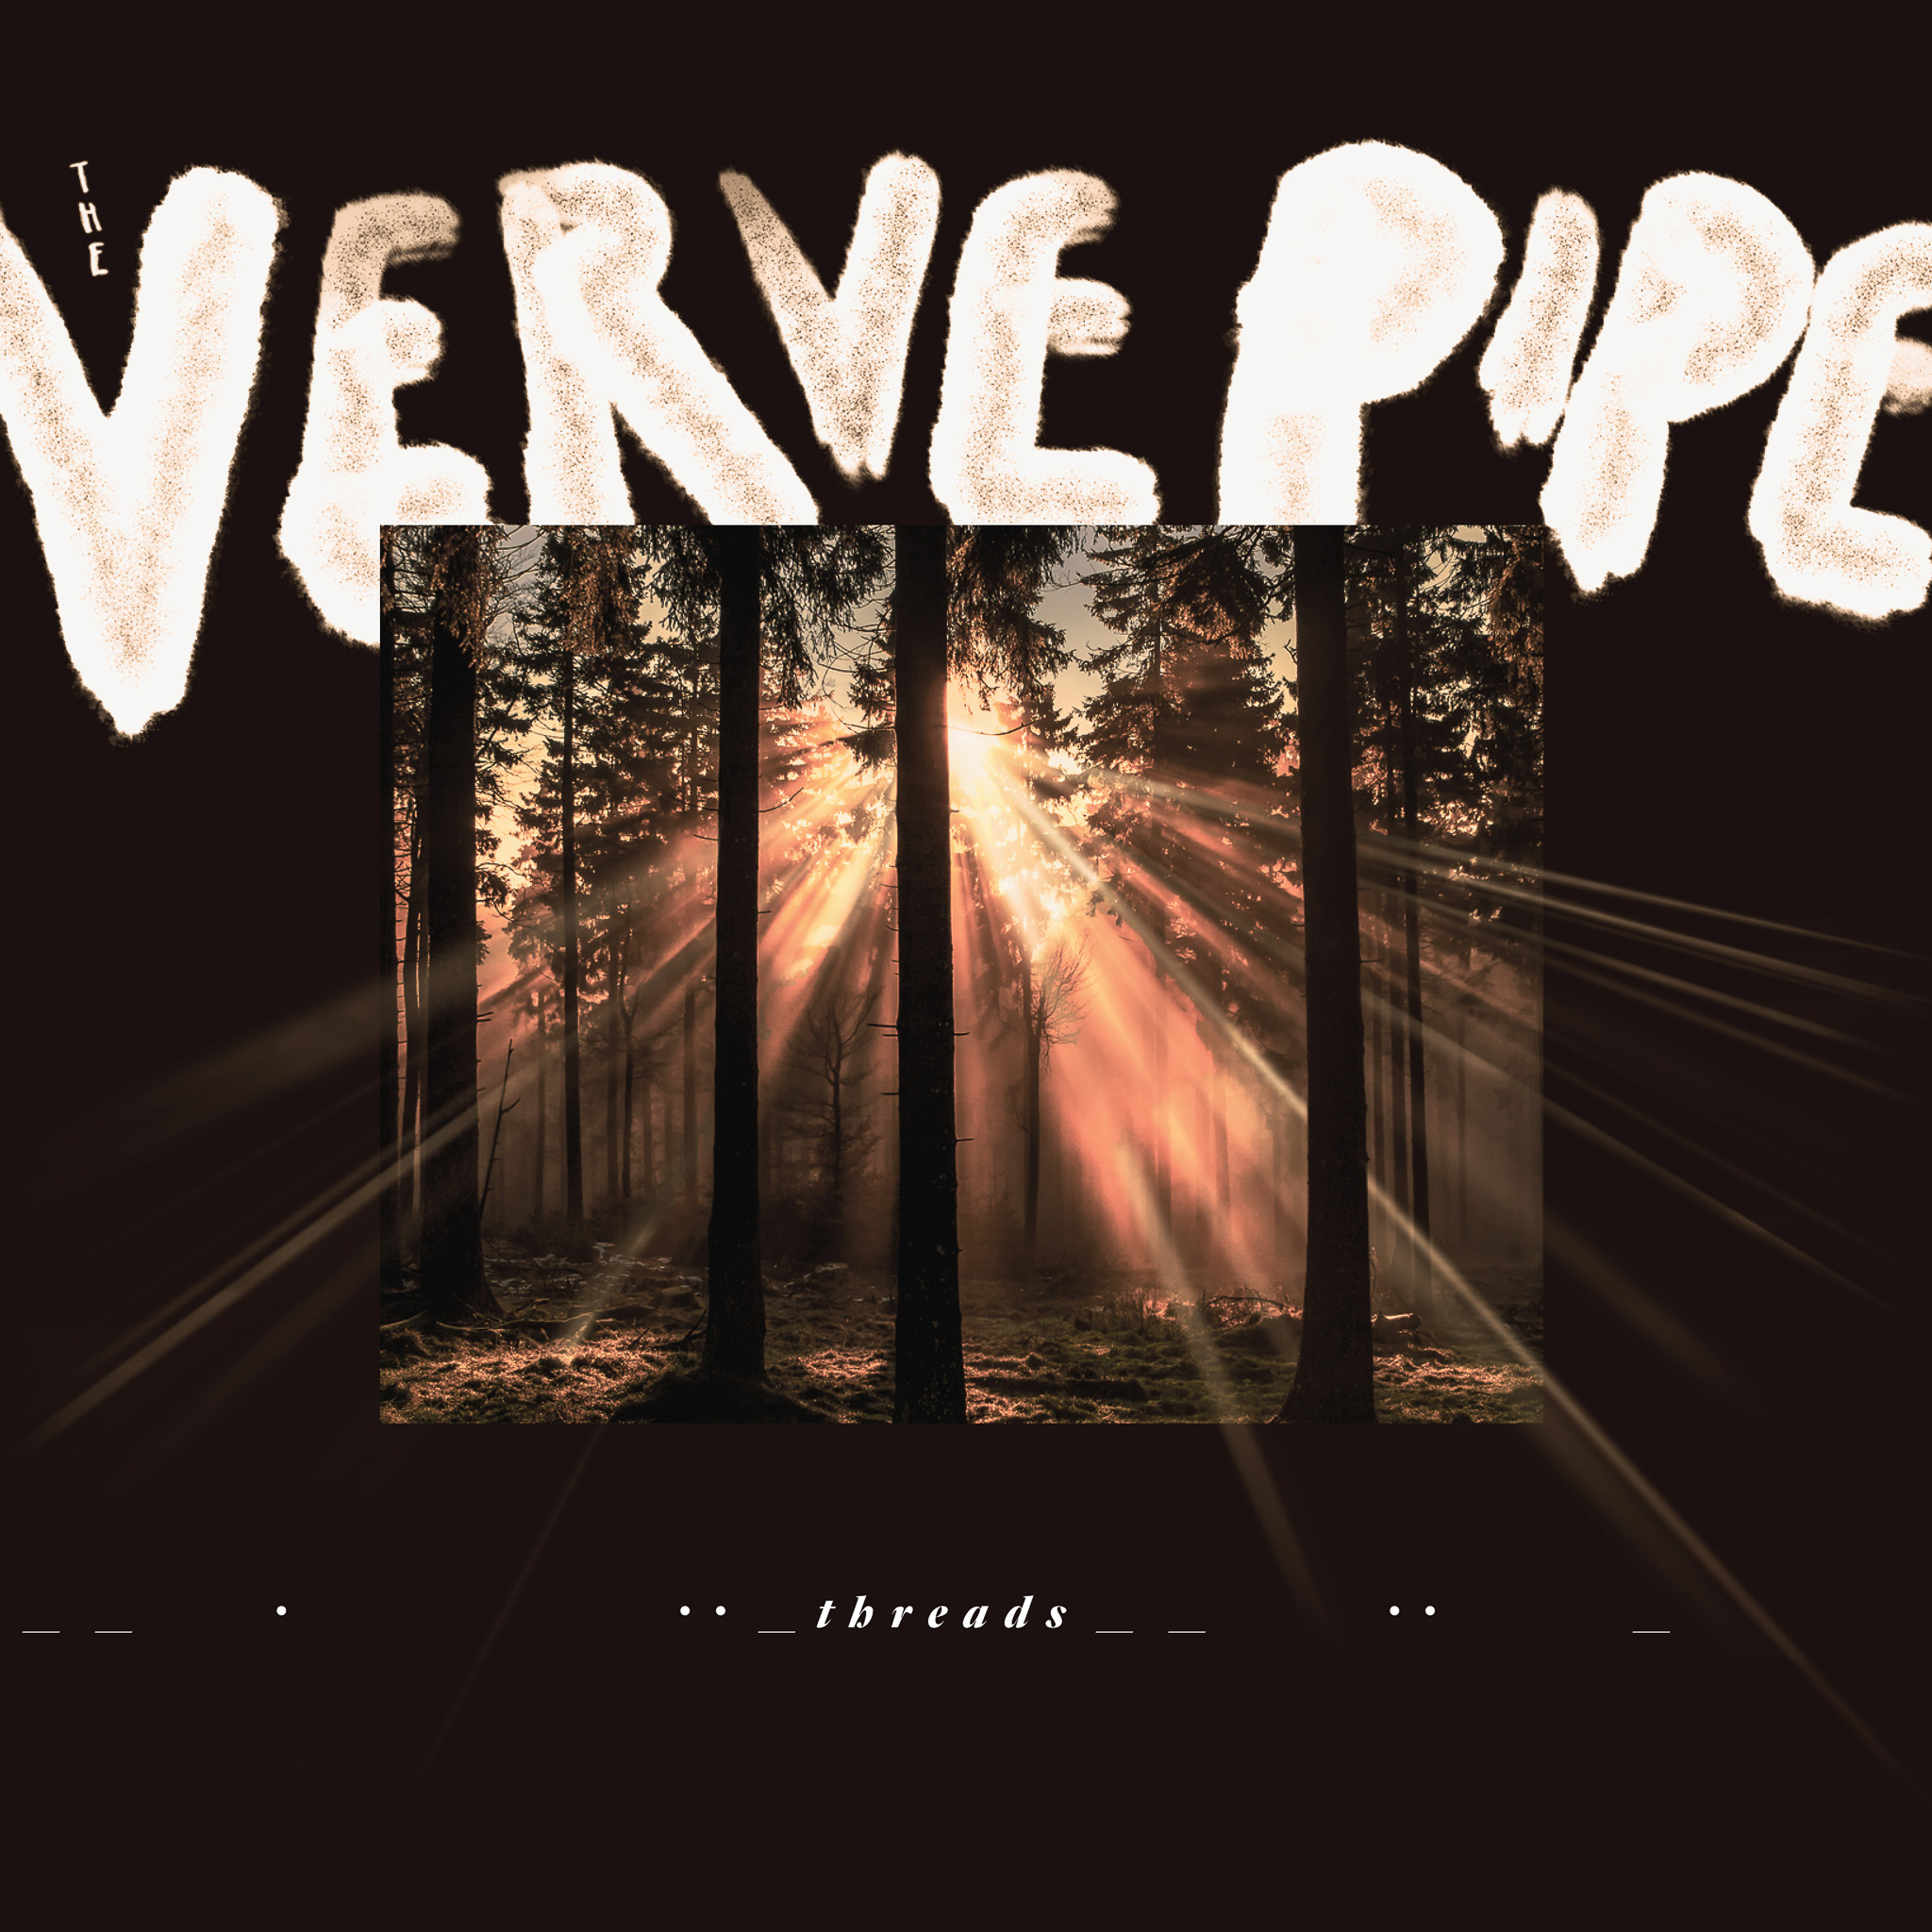 The Verve Pipe album cover, light coming in through trees.